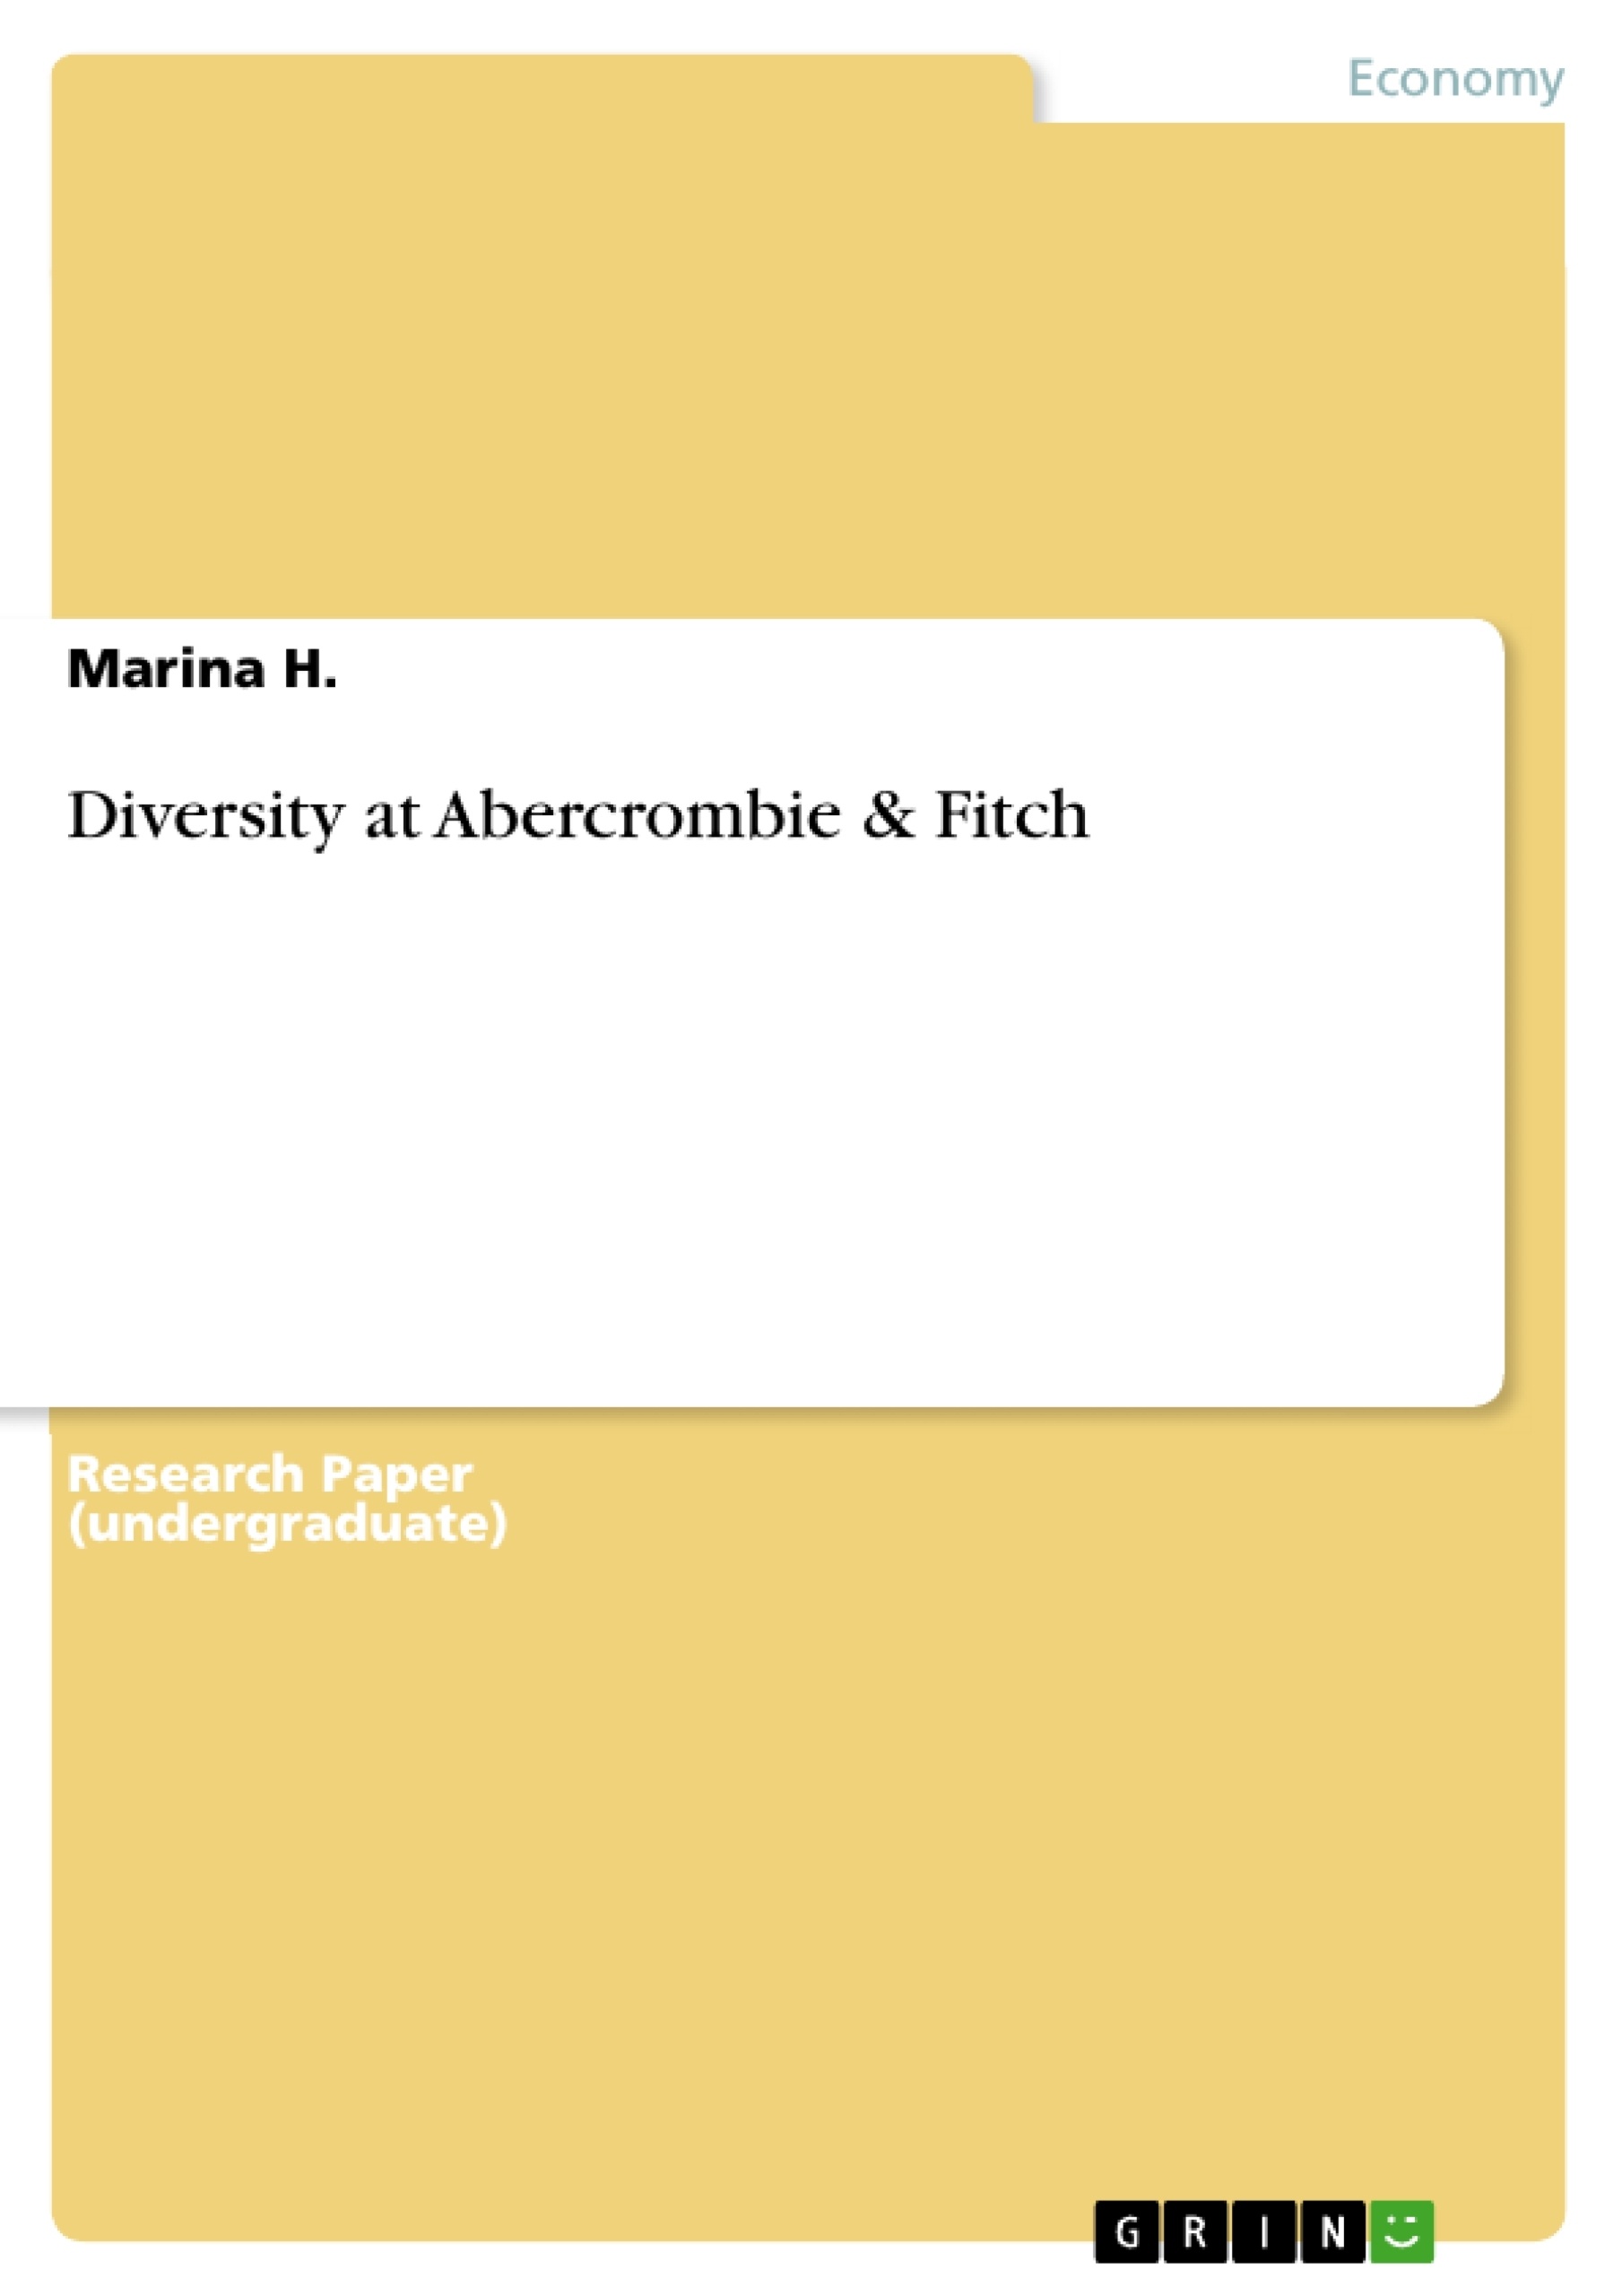 Título: Diversity at Abercrombie & Fitch